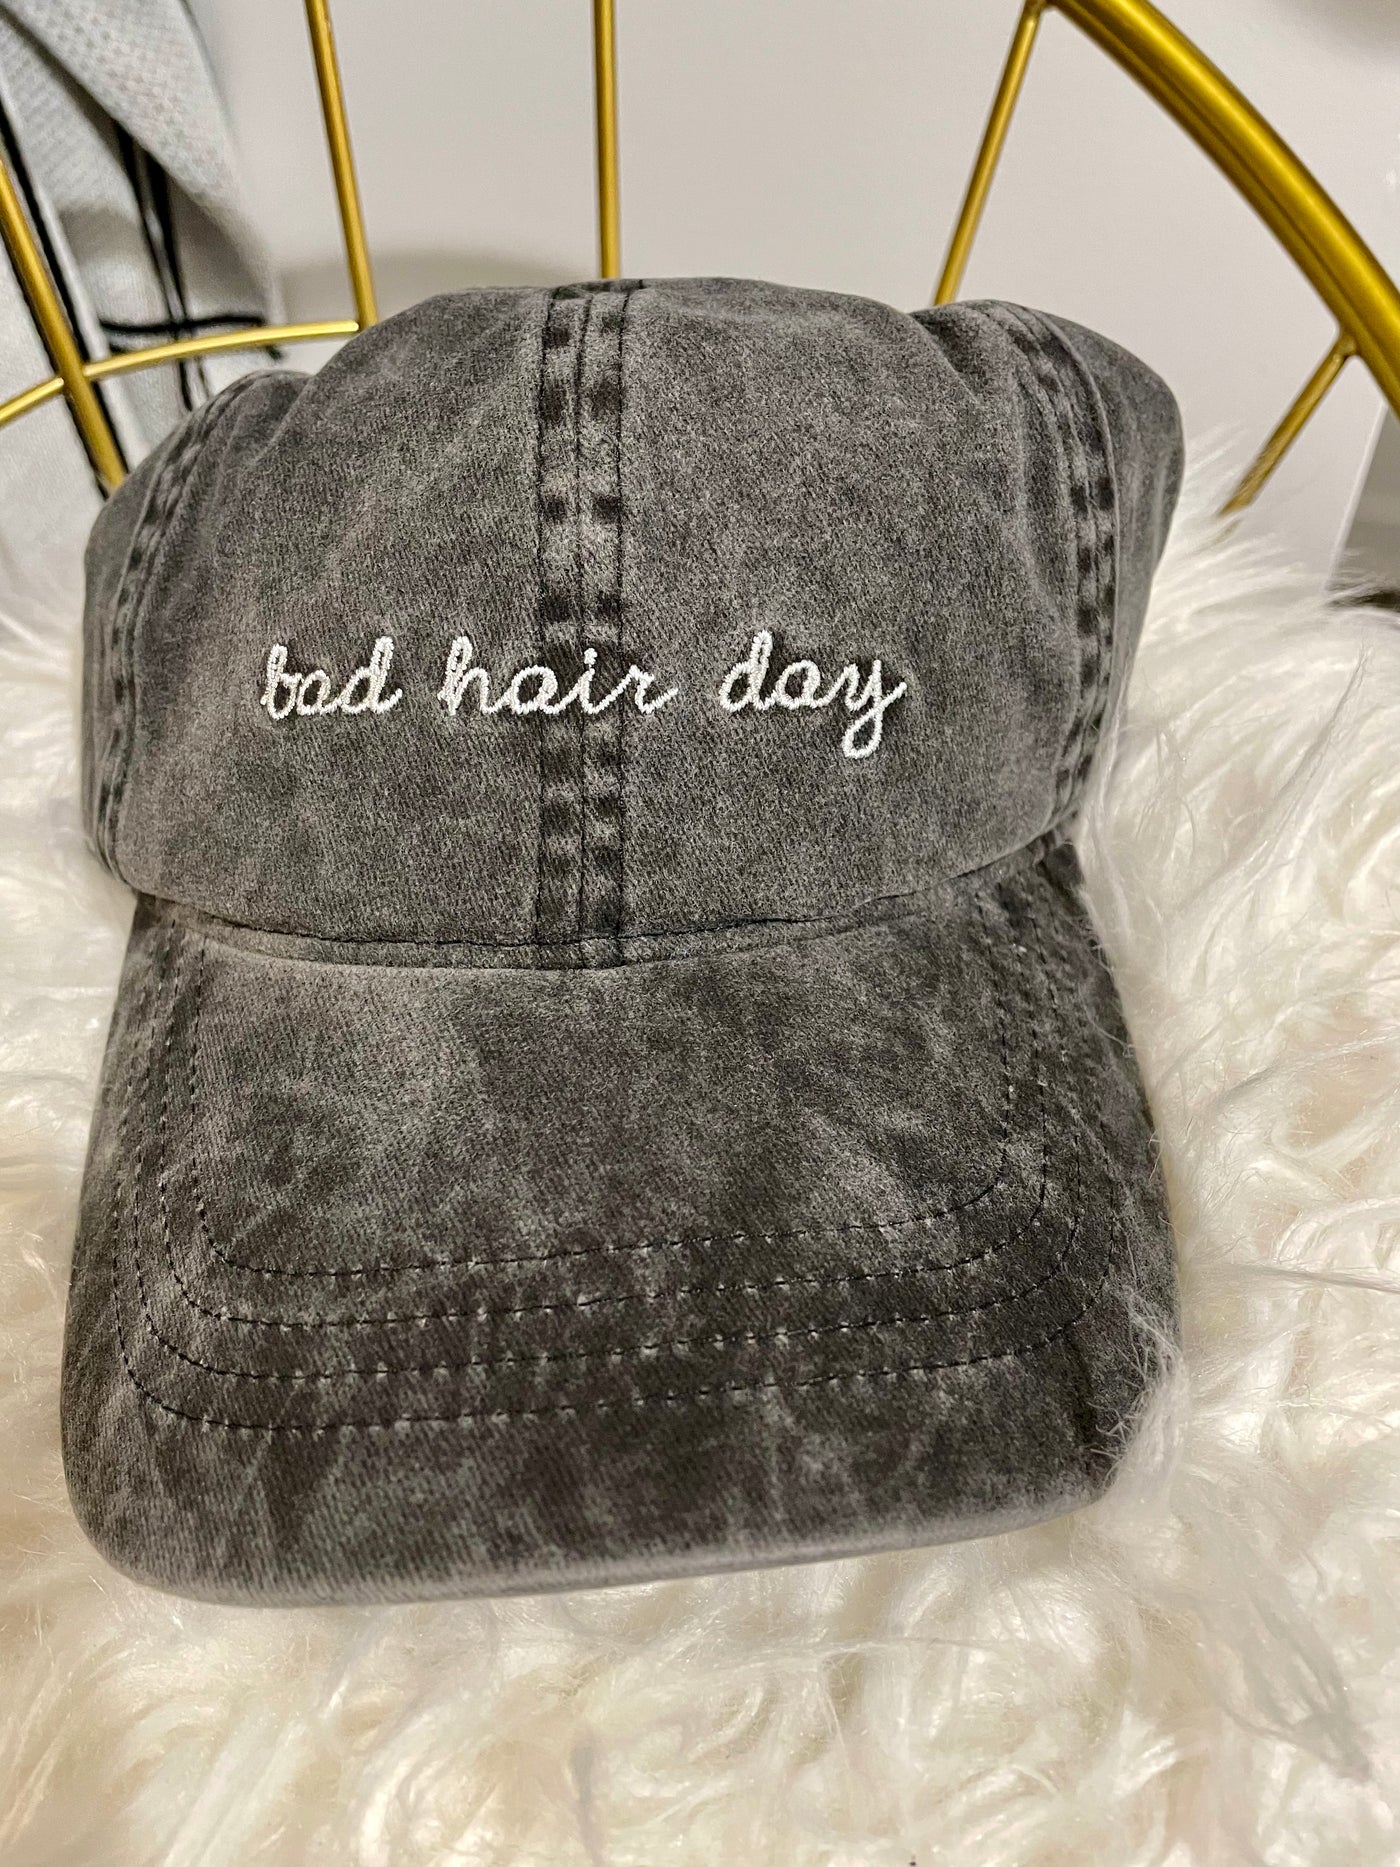 Bad hair day embroidered charcoal baseball cap